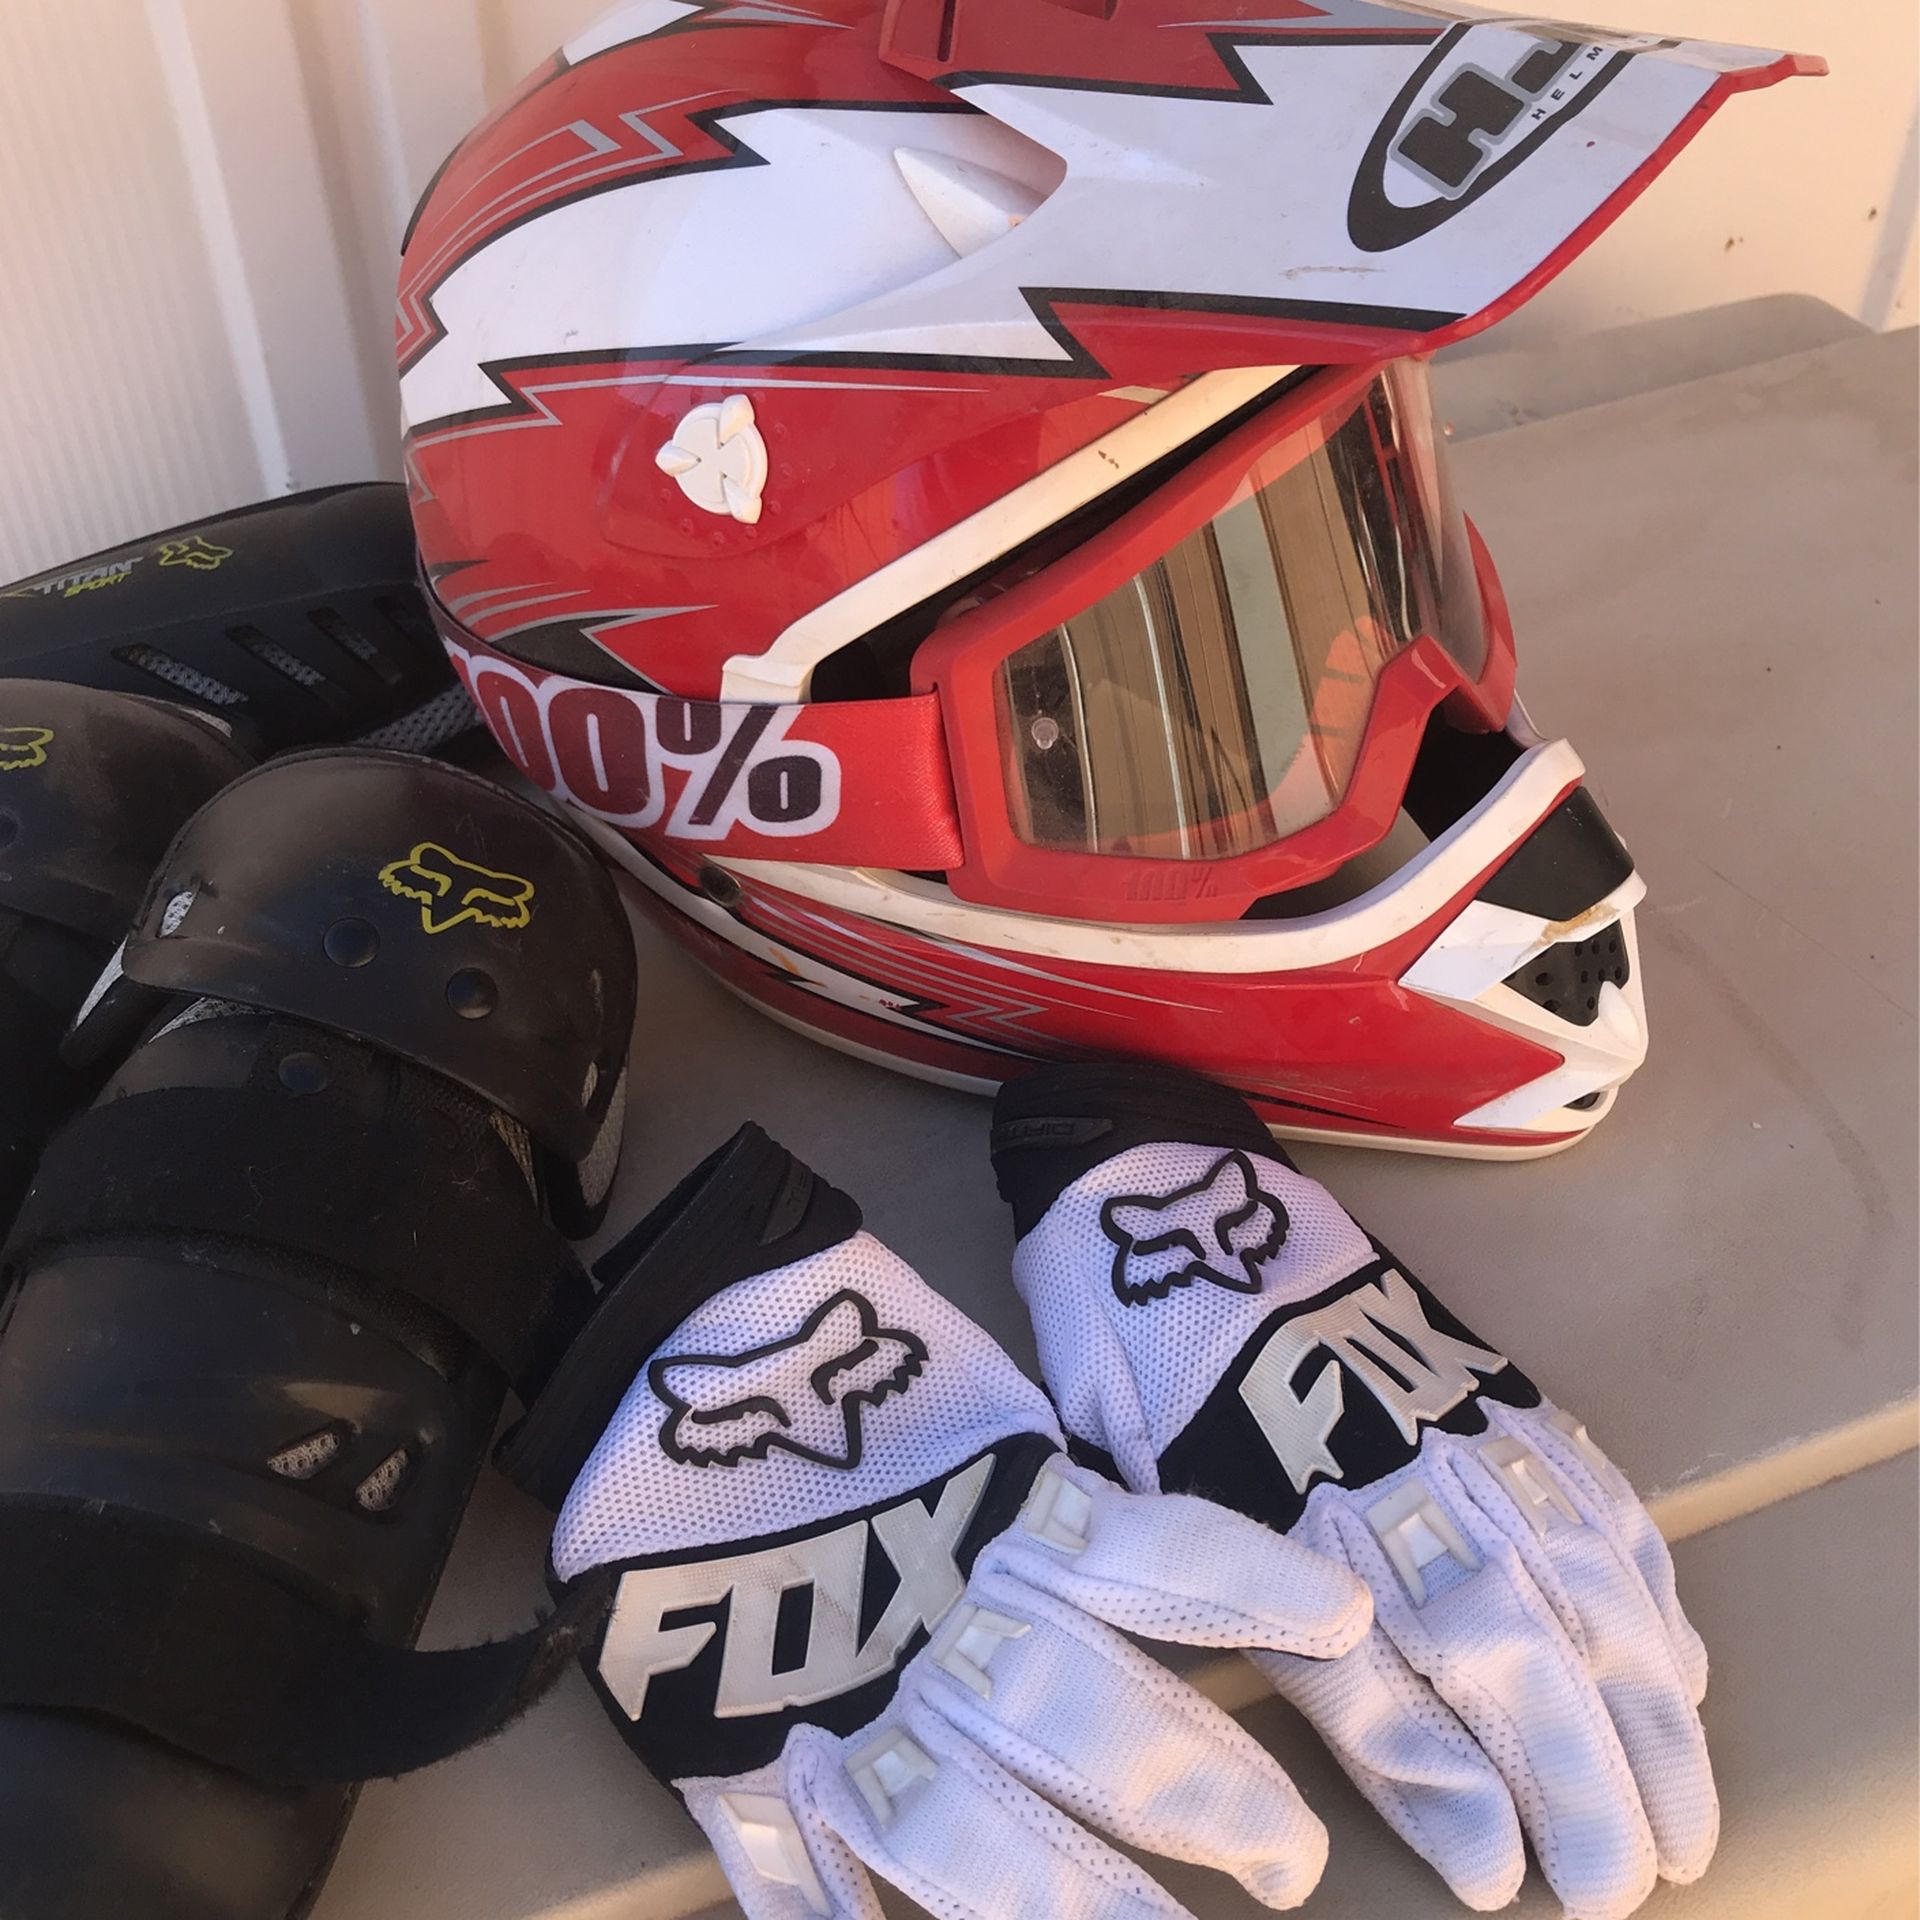 HJC dirtbike helmet hundred percent goggles youth medium brand new Fox gloves small brand new kneepads missing one elbow pad